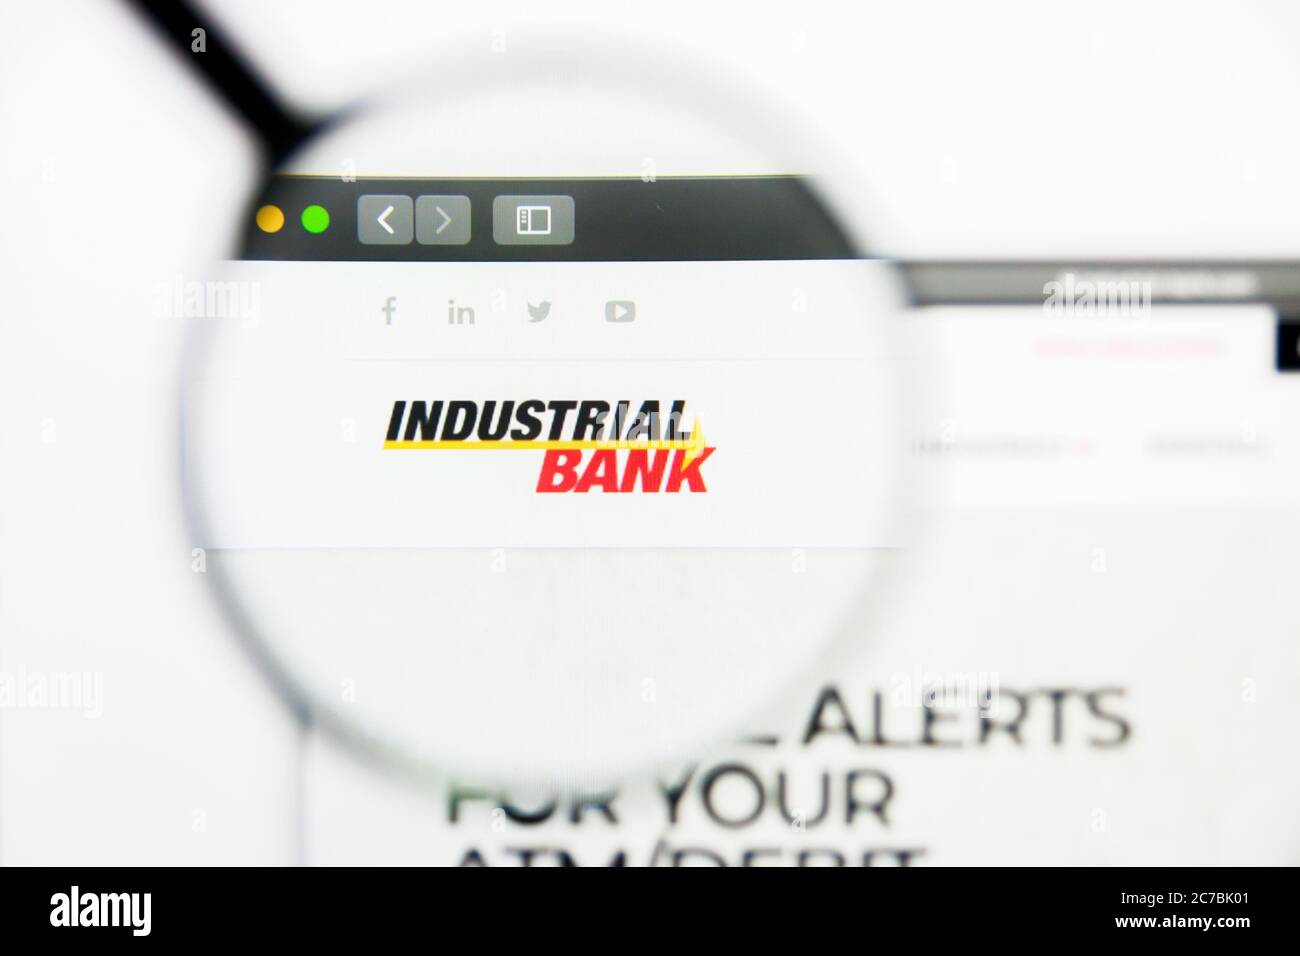 Los Angeles, California, USA - 24 March 2019: Illustrative Editorial of Industrial Bank website homepage. Industrial Bank logo visible on display Stock Photo